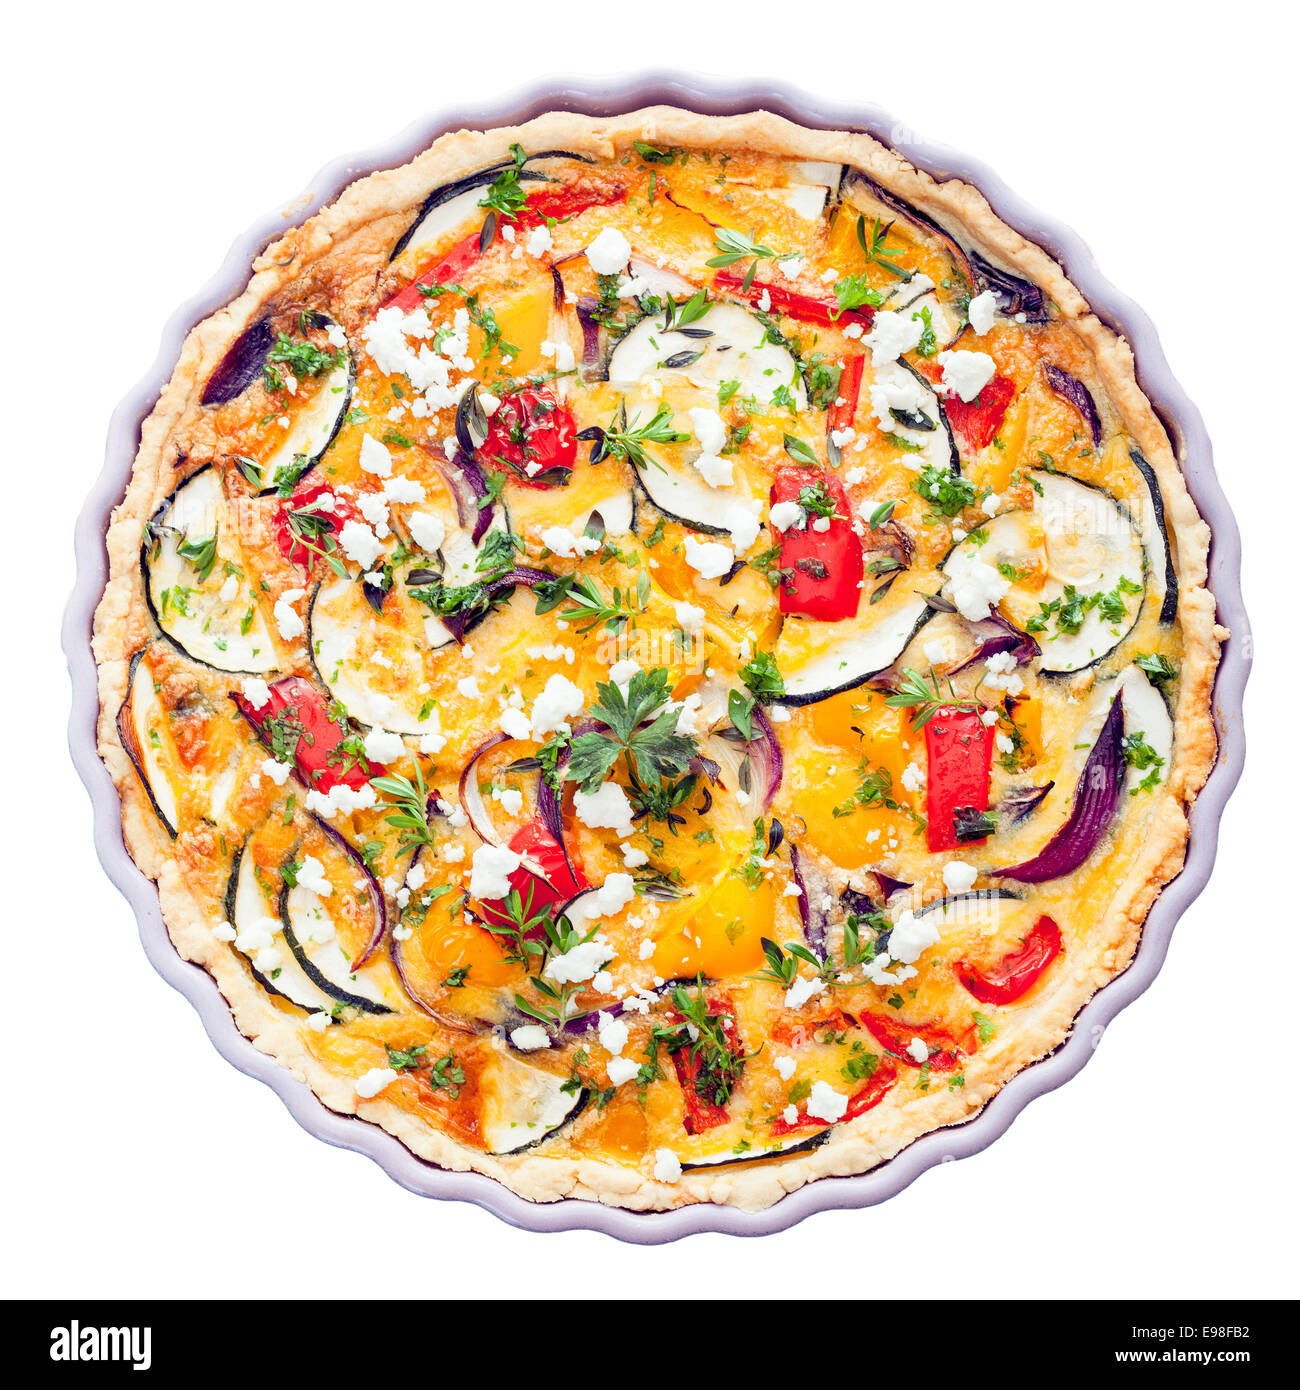 Overhead view of a delicious savory tart with clipping path in a decorative fluted pie dish with eggplant, cheese, egg, herbs and peppers for a tasty vegetarian meal Stock Photo